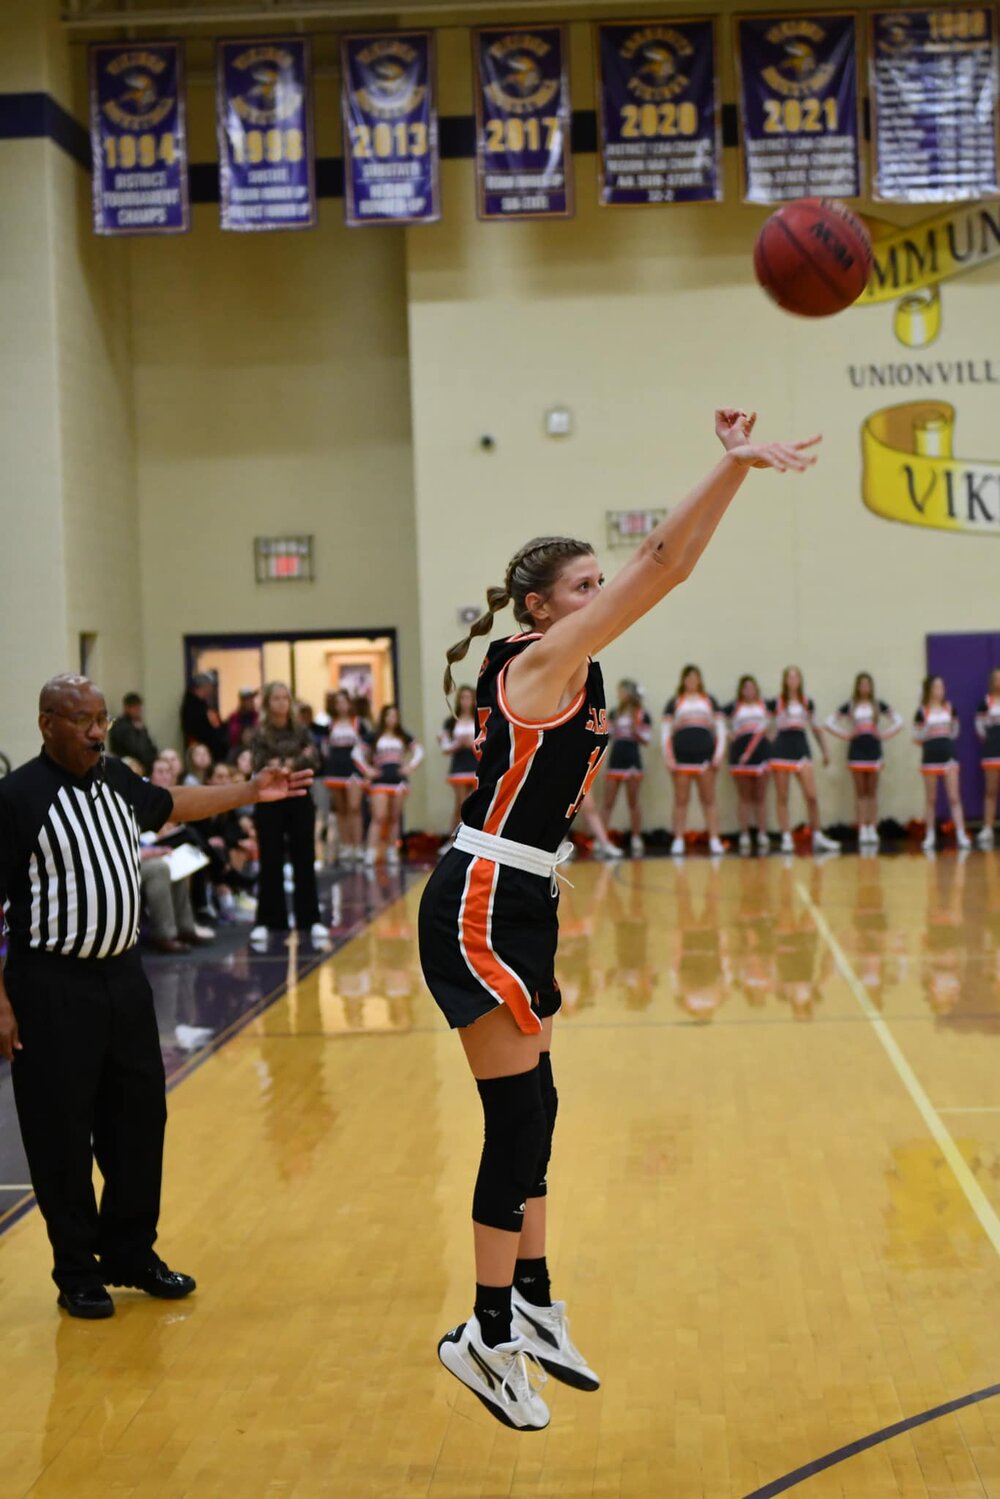 Kaydence Miller (14) lets loose from downtown at Community. She finished with 12 points on four made three-pointers in Friday night's loss to the Viqueens.